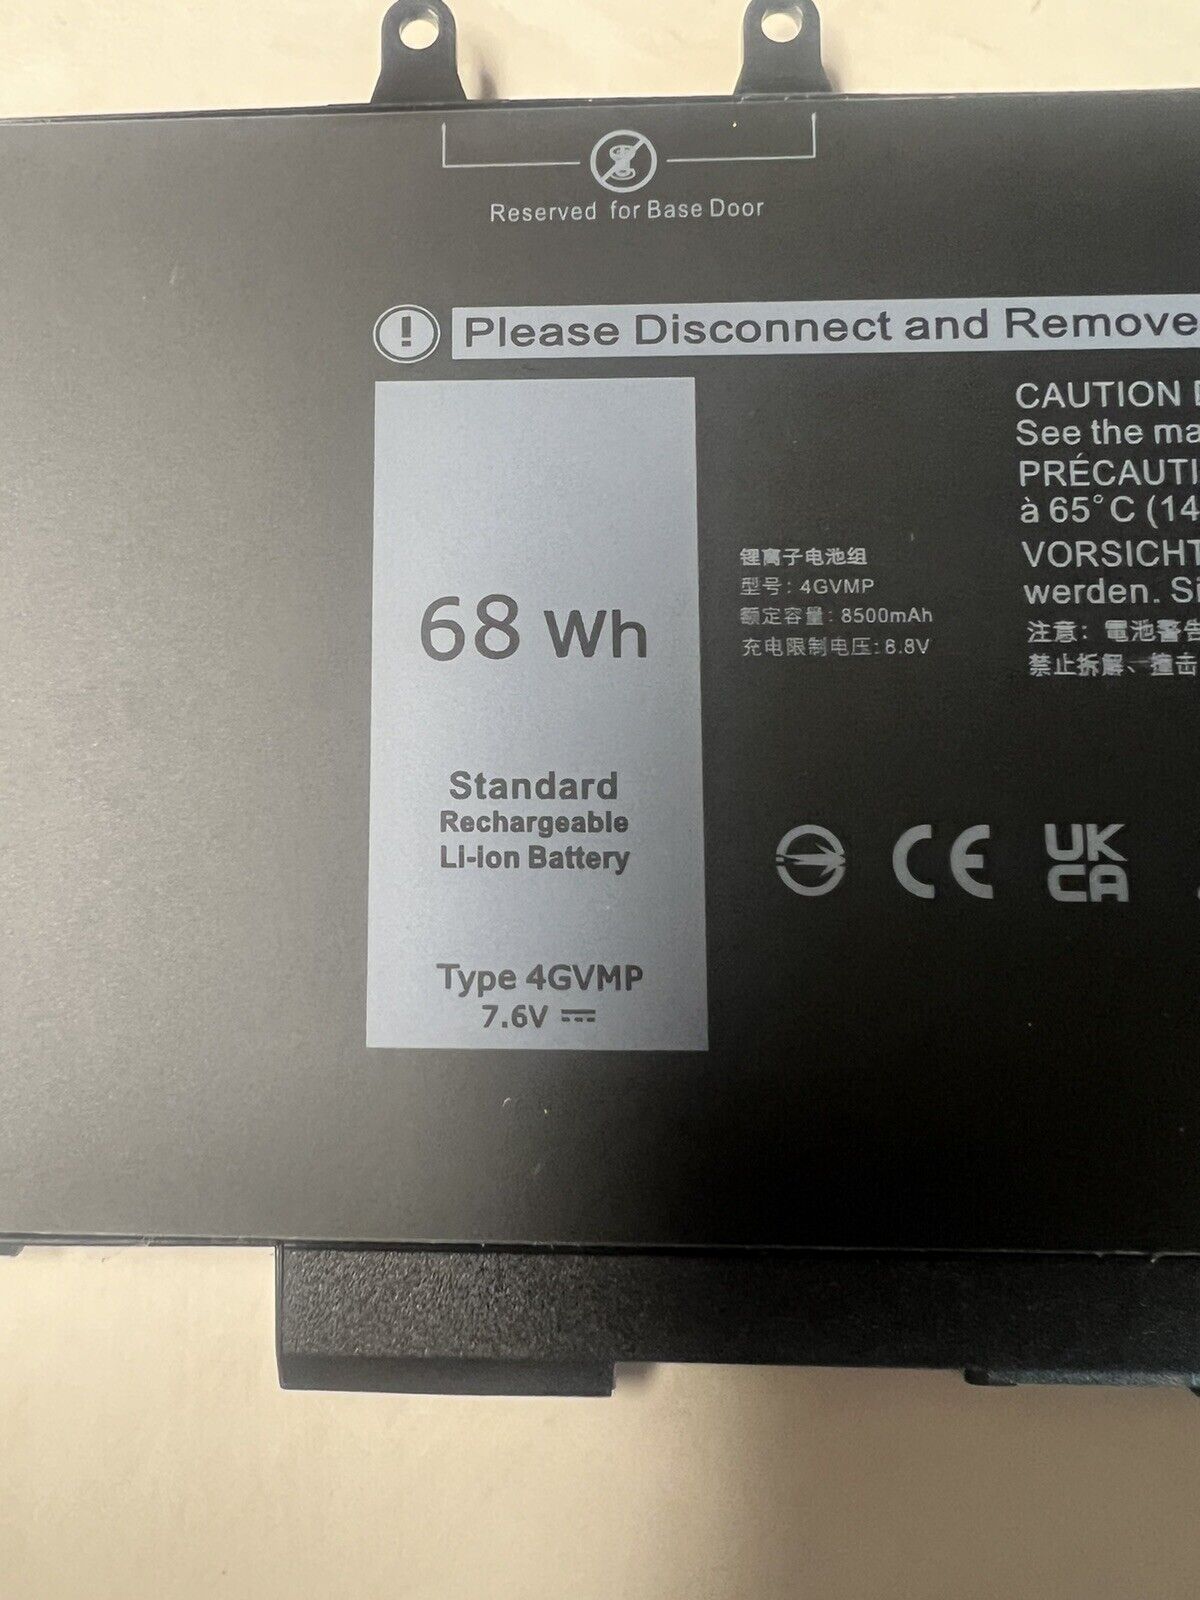 68 wh standard rechargeable Li-ion battery 